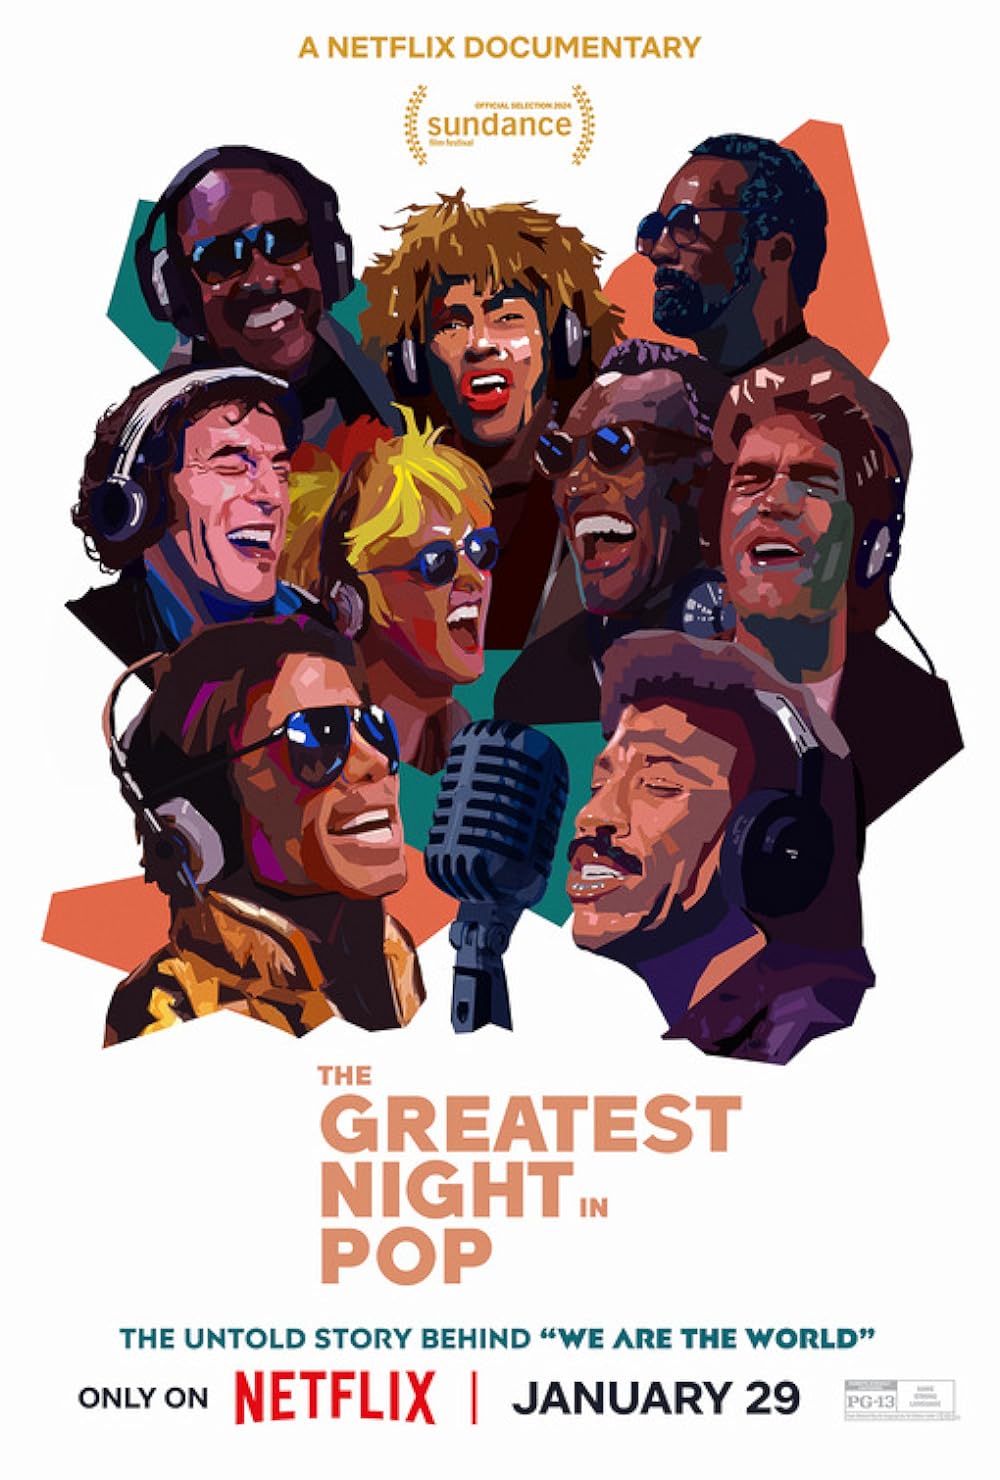 The Greatest Night in Pop (January 29) - Streaming on NetflixThe Greatest Night in Pop offers an in-depth look at the creation of the iconic charity single ‘We Are the World’ in 1985, a night that almost didn’t happen. The film highlights the pivotal roles of Quincy Jones, Lionel Richie, and Michael Jackson in bringing together 46 of the biggest pop music stars to record the song in one night.